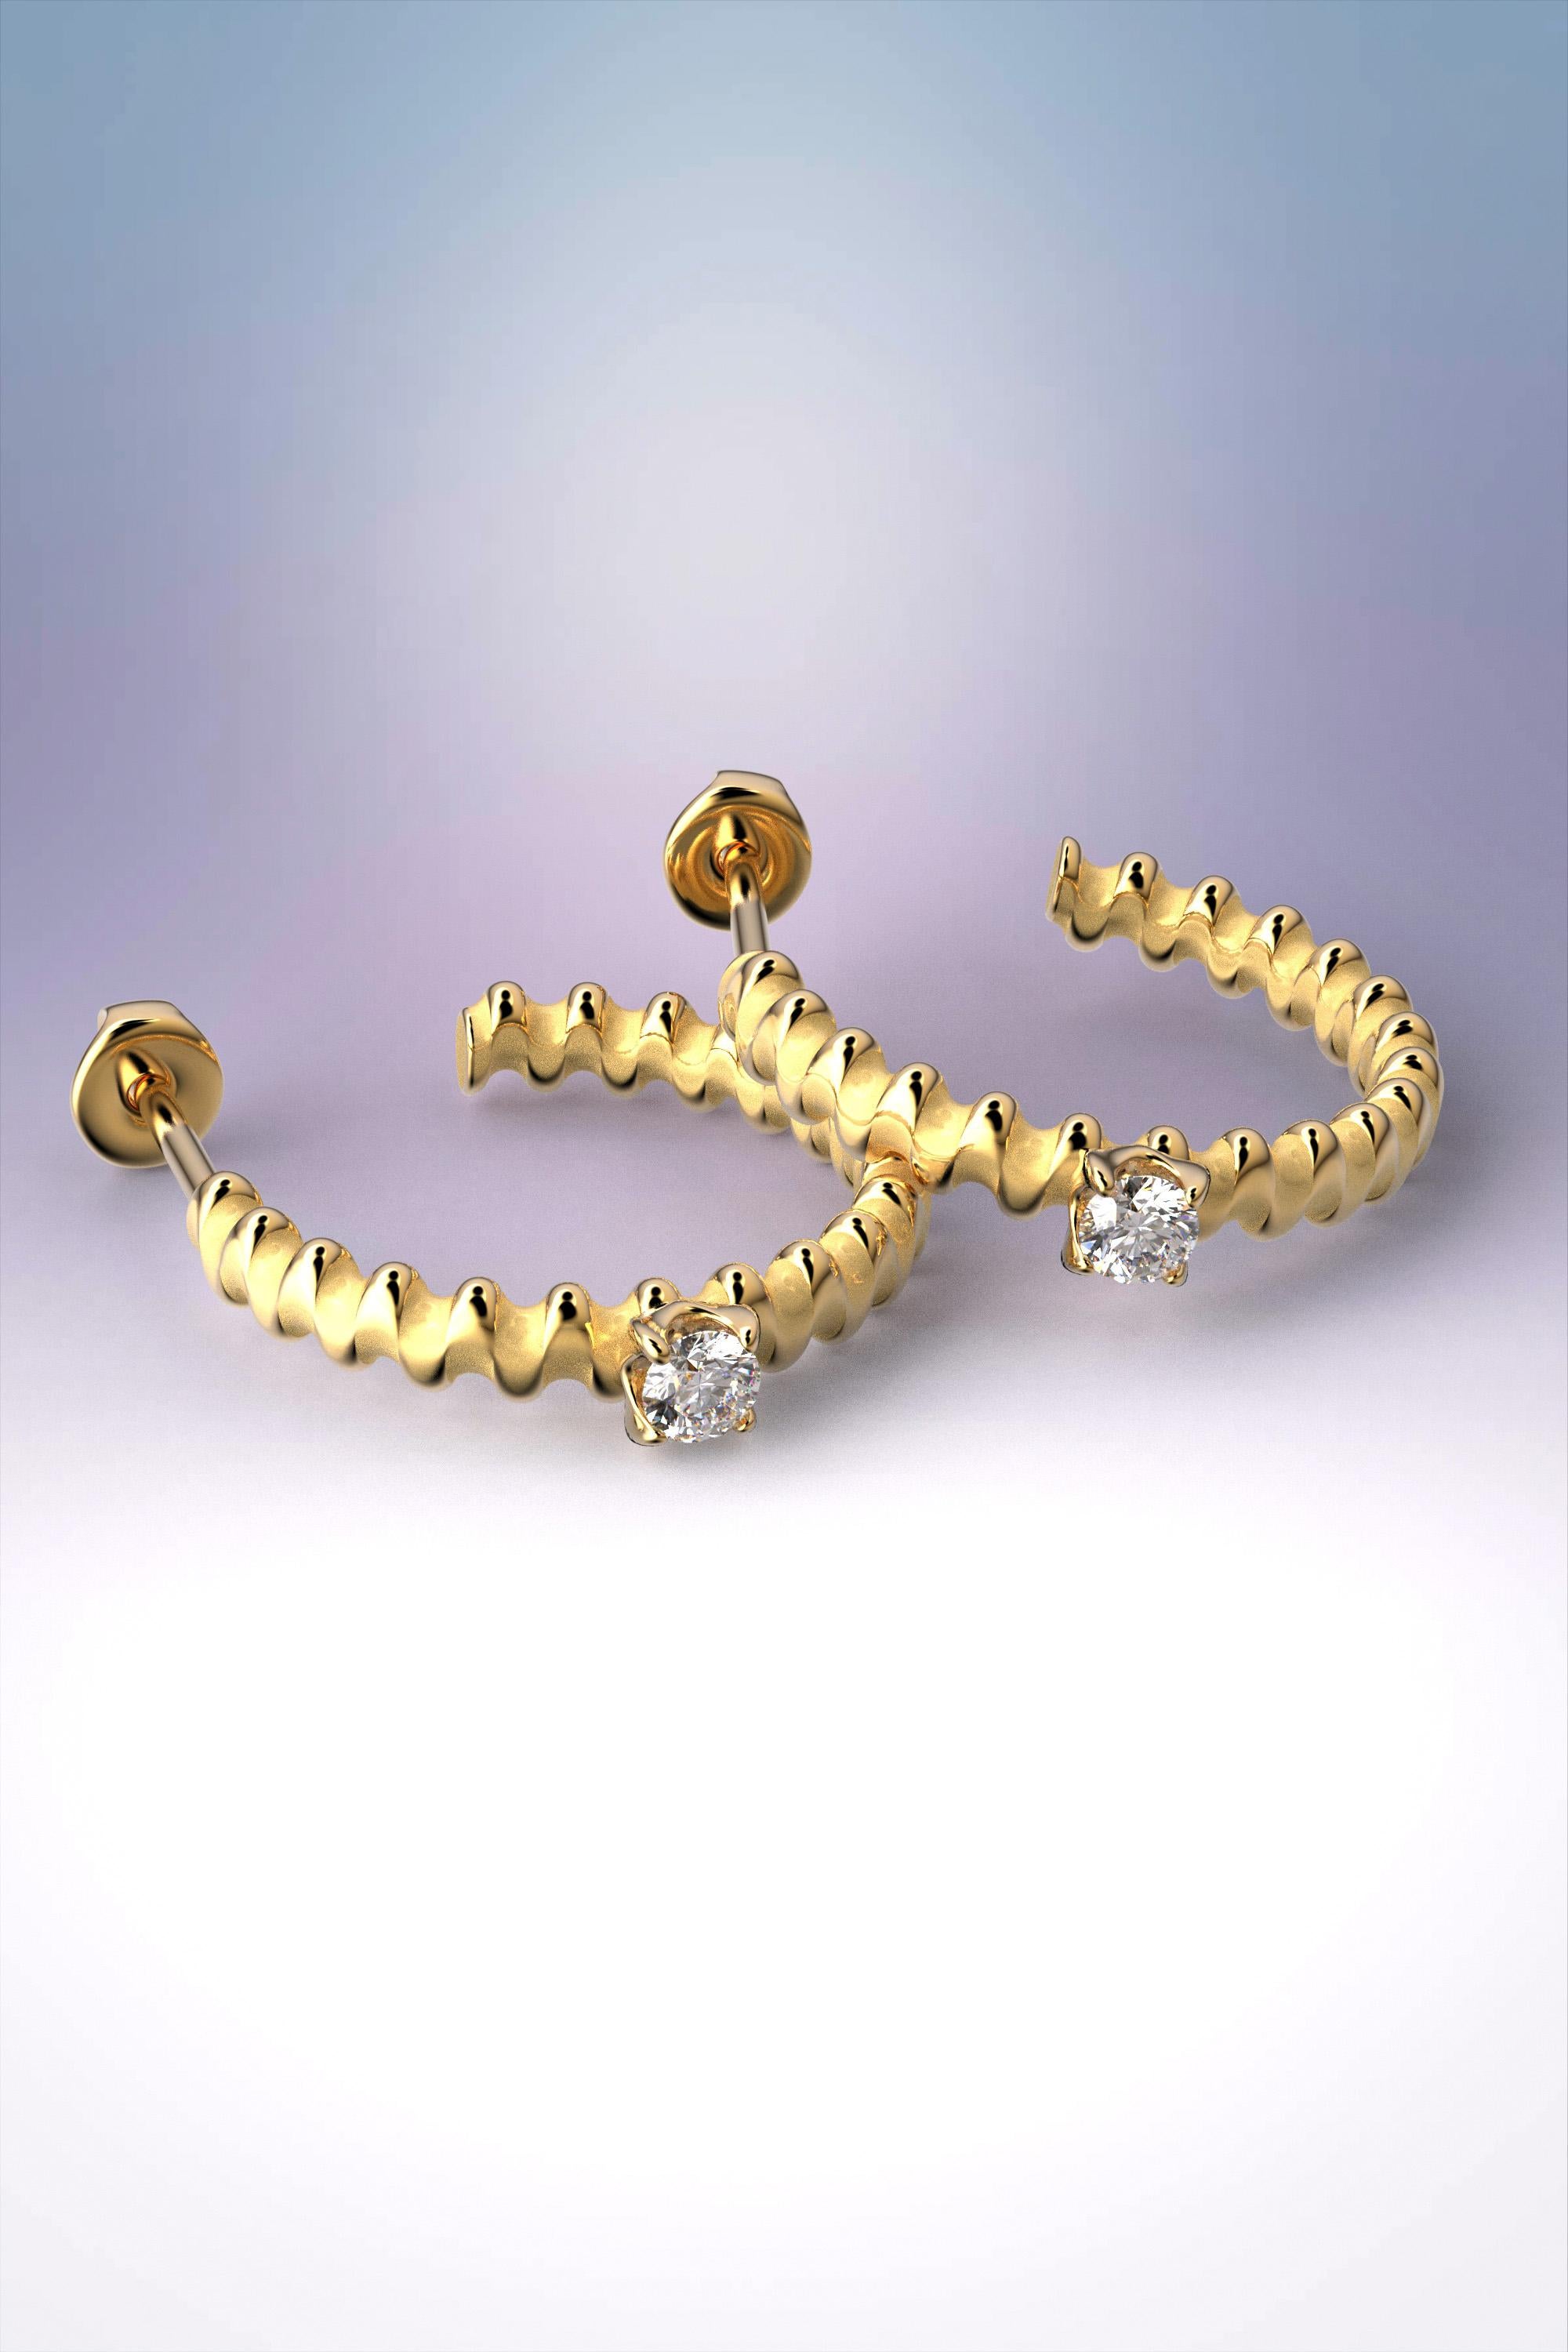 Made to order Diamond hoop earrings, designed and crafted in Italy.
Elegant earrings made in Italy in 14k solid gold with natural diamonds.
14k gold
Size : 19mm x 19mm x 3,3 mm
Gemstones(diamond version) : 2 natural diamonds cts 0,2 tw G